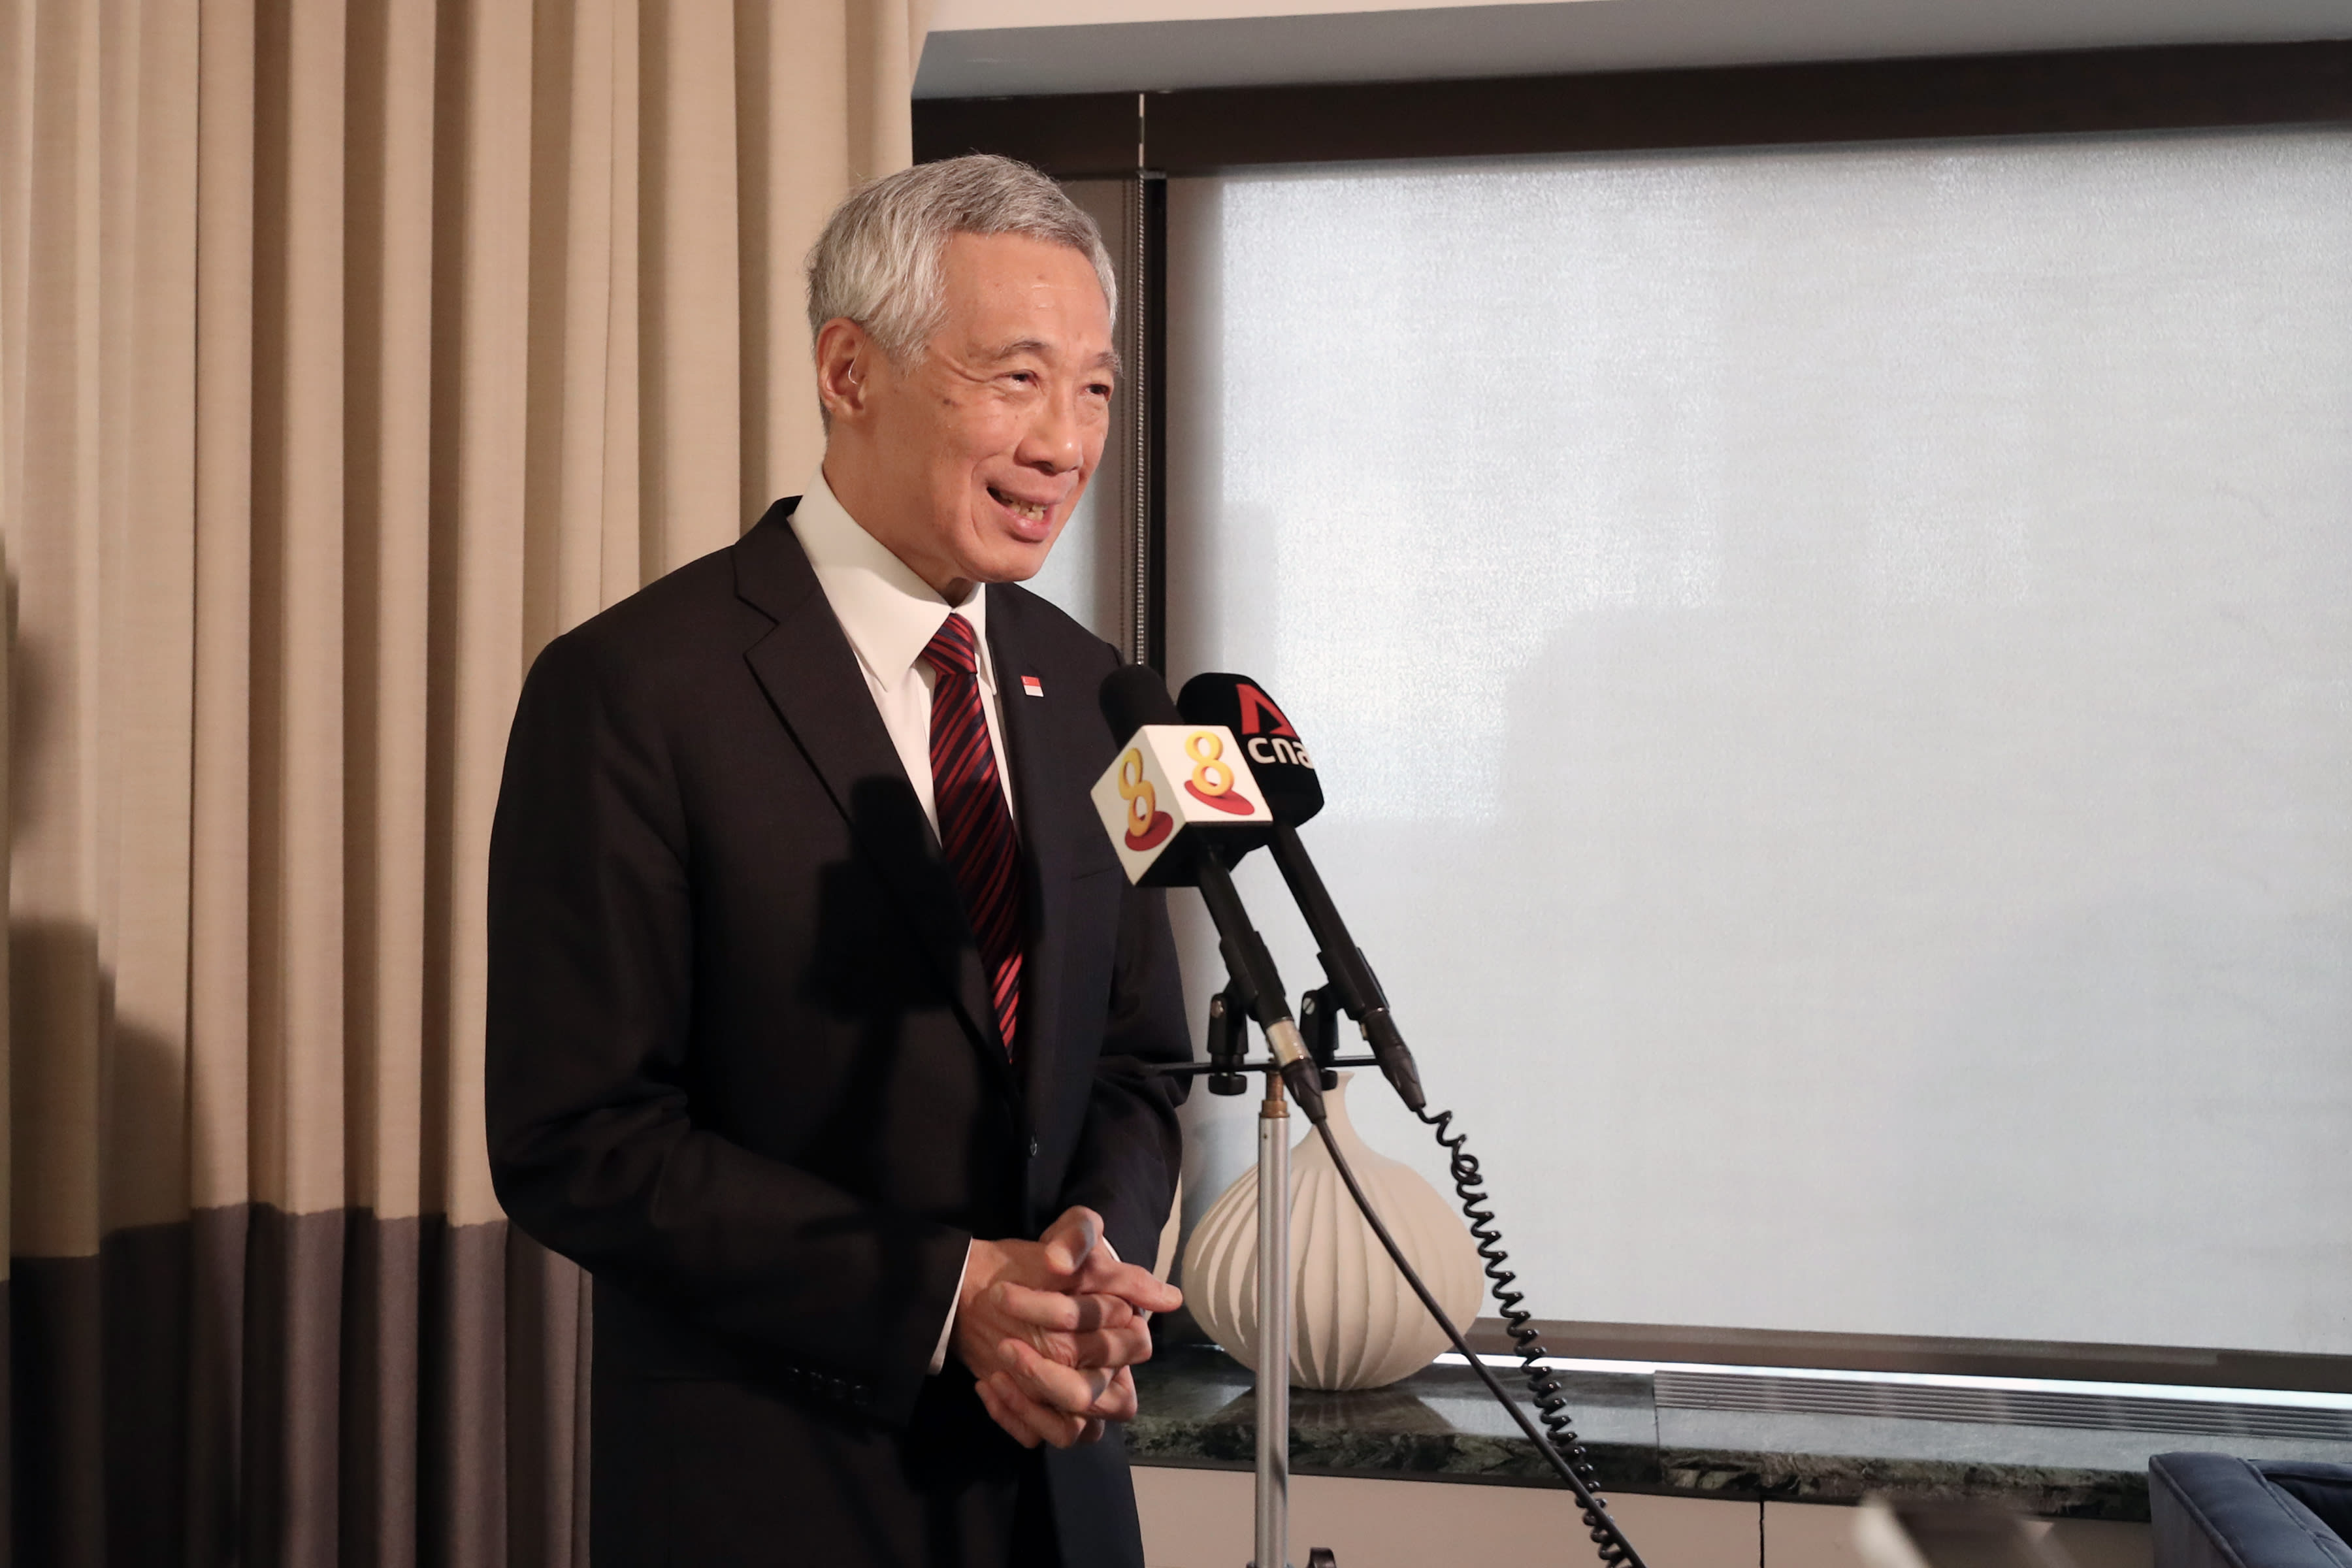 Prime Minister Lee Hsien Loong said he sought to explain the basis for Singapore’s principled stand on the Russian invasion of Ukraine to the people he met while in the United States.